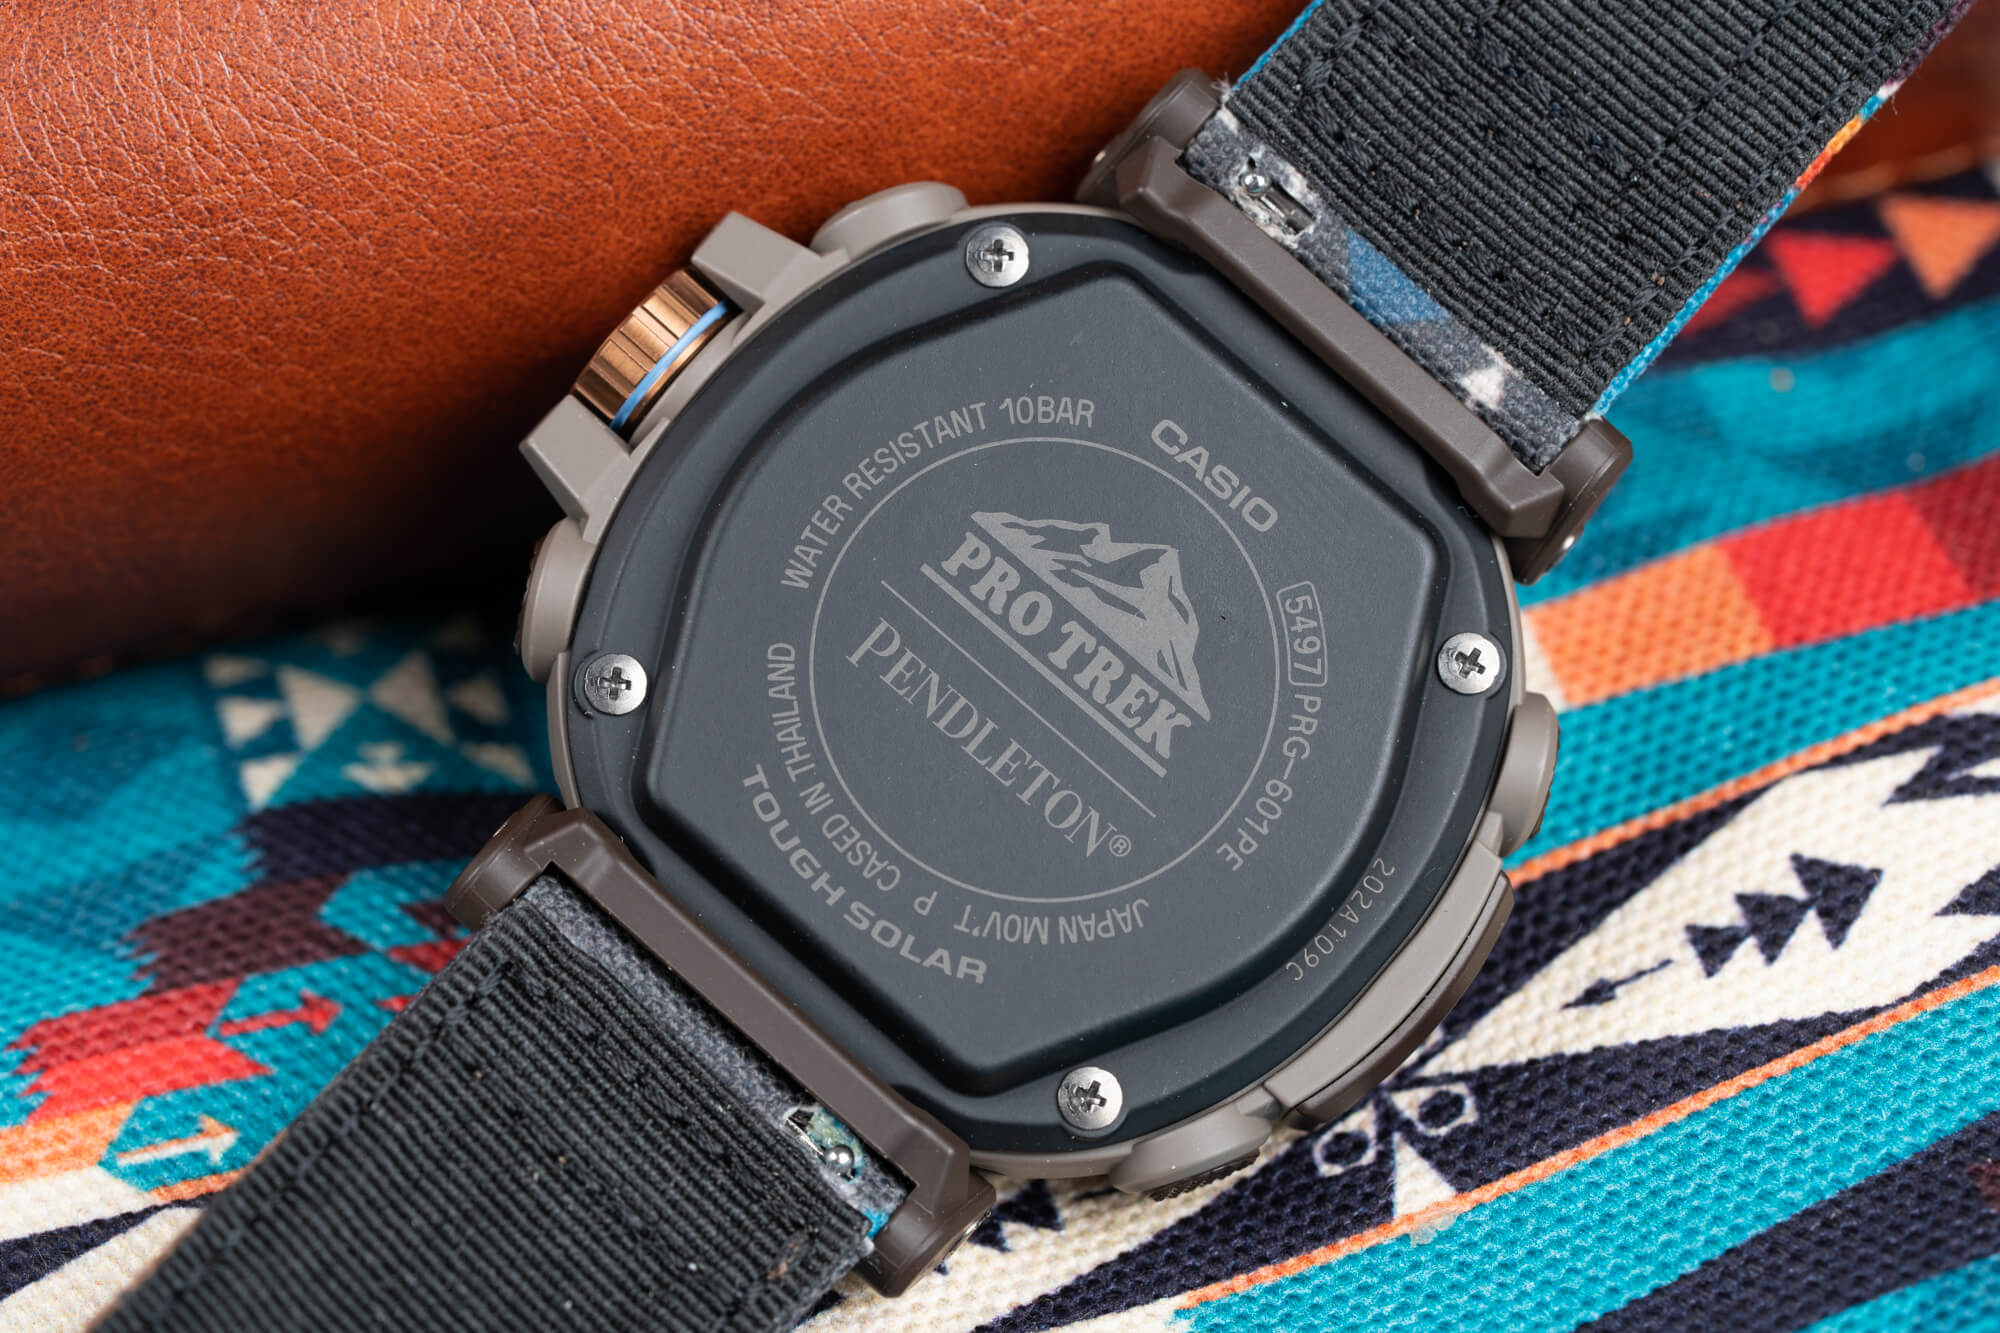 The Latest Casio Pro Trek Turns a Blanket Into the Ultimate Fall Watch